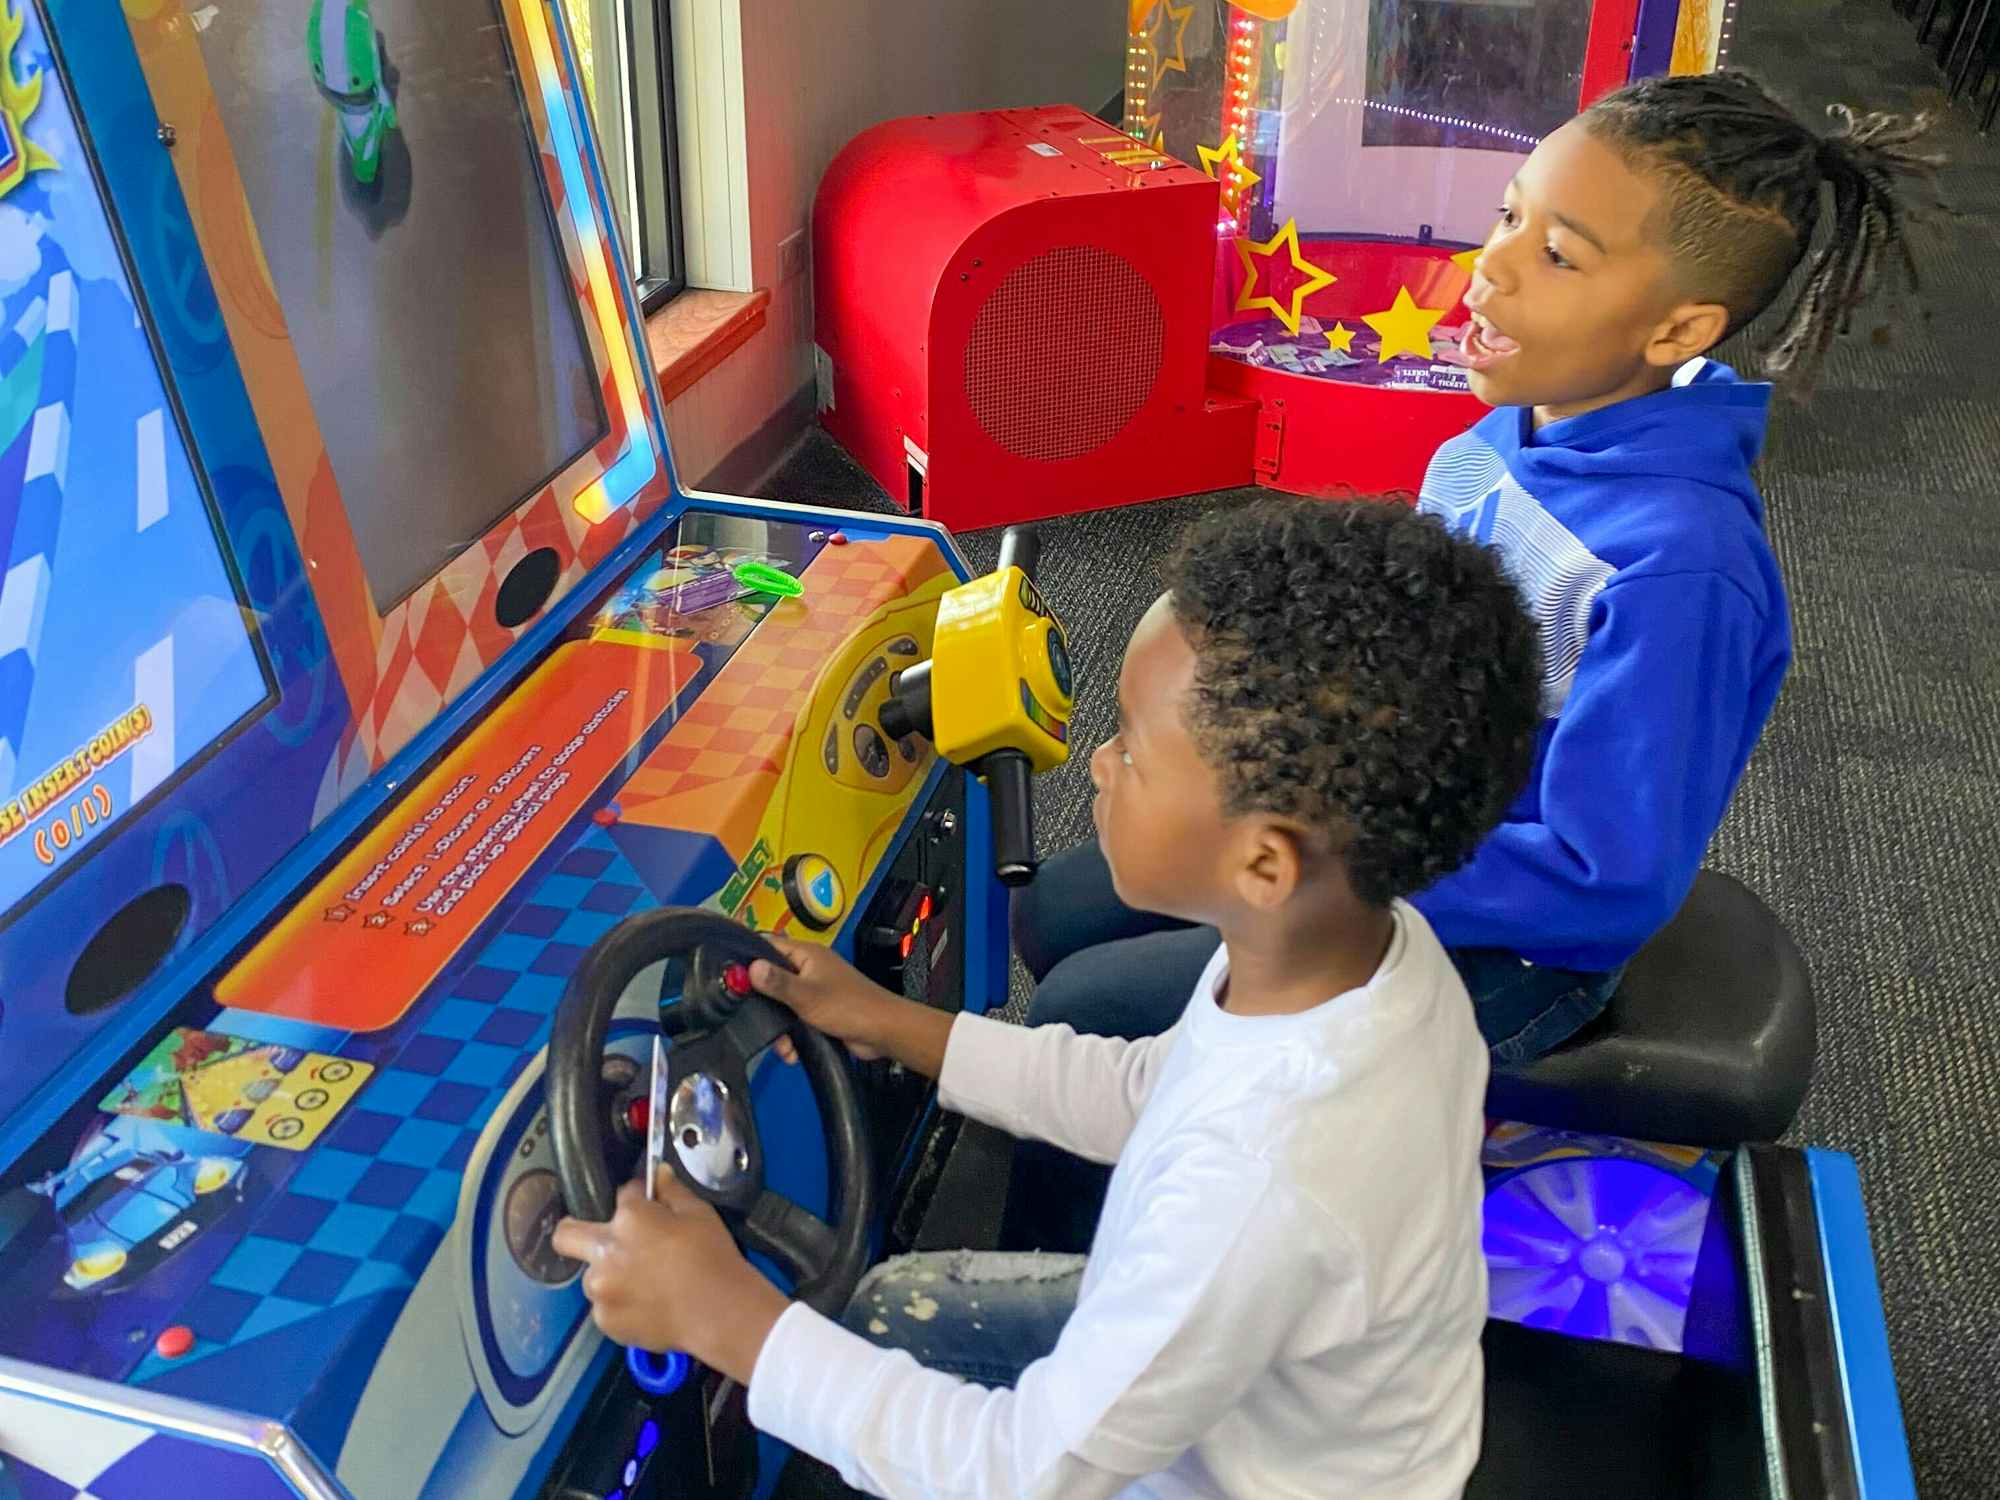 Kids playing games at Chuck E Cheese